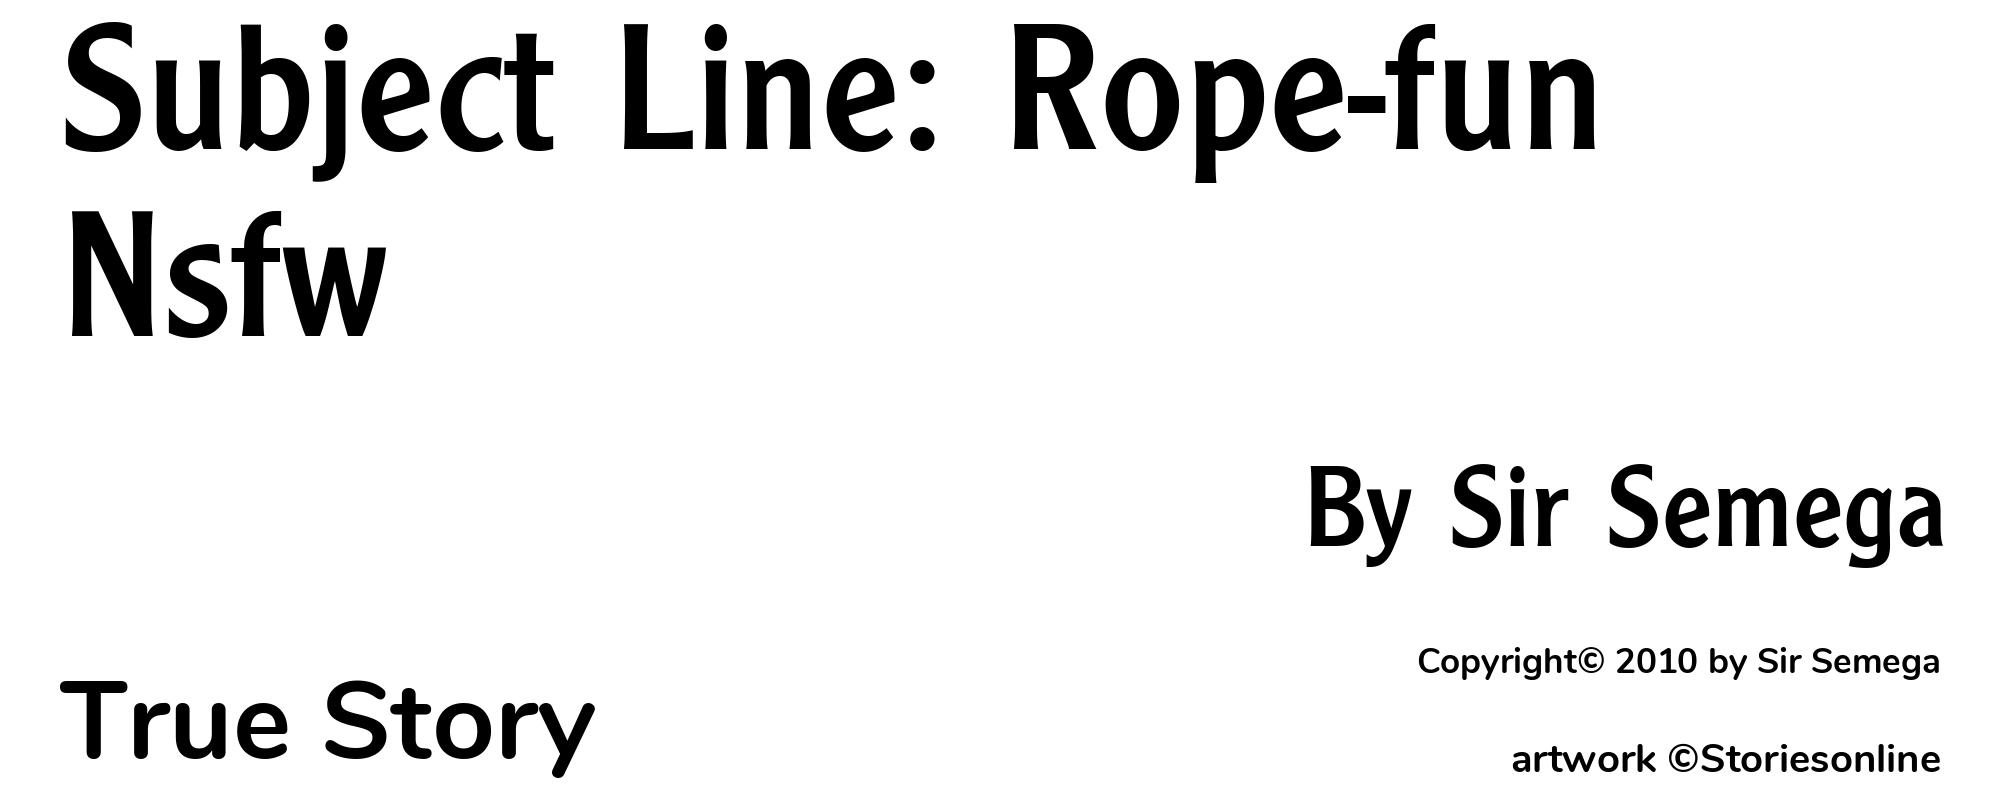 Subject Line: Rope-fun Nsfw - Cover